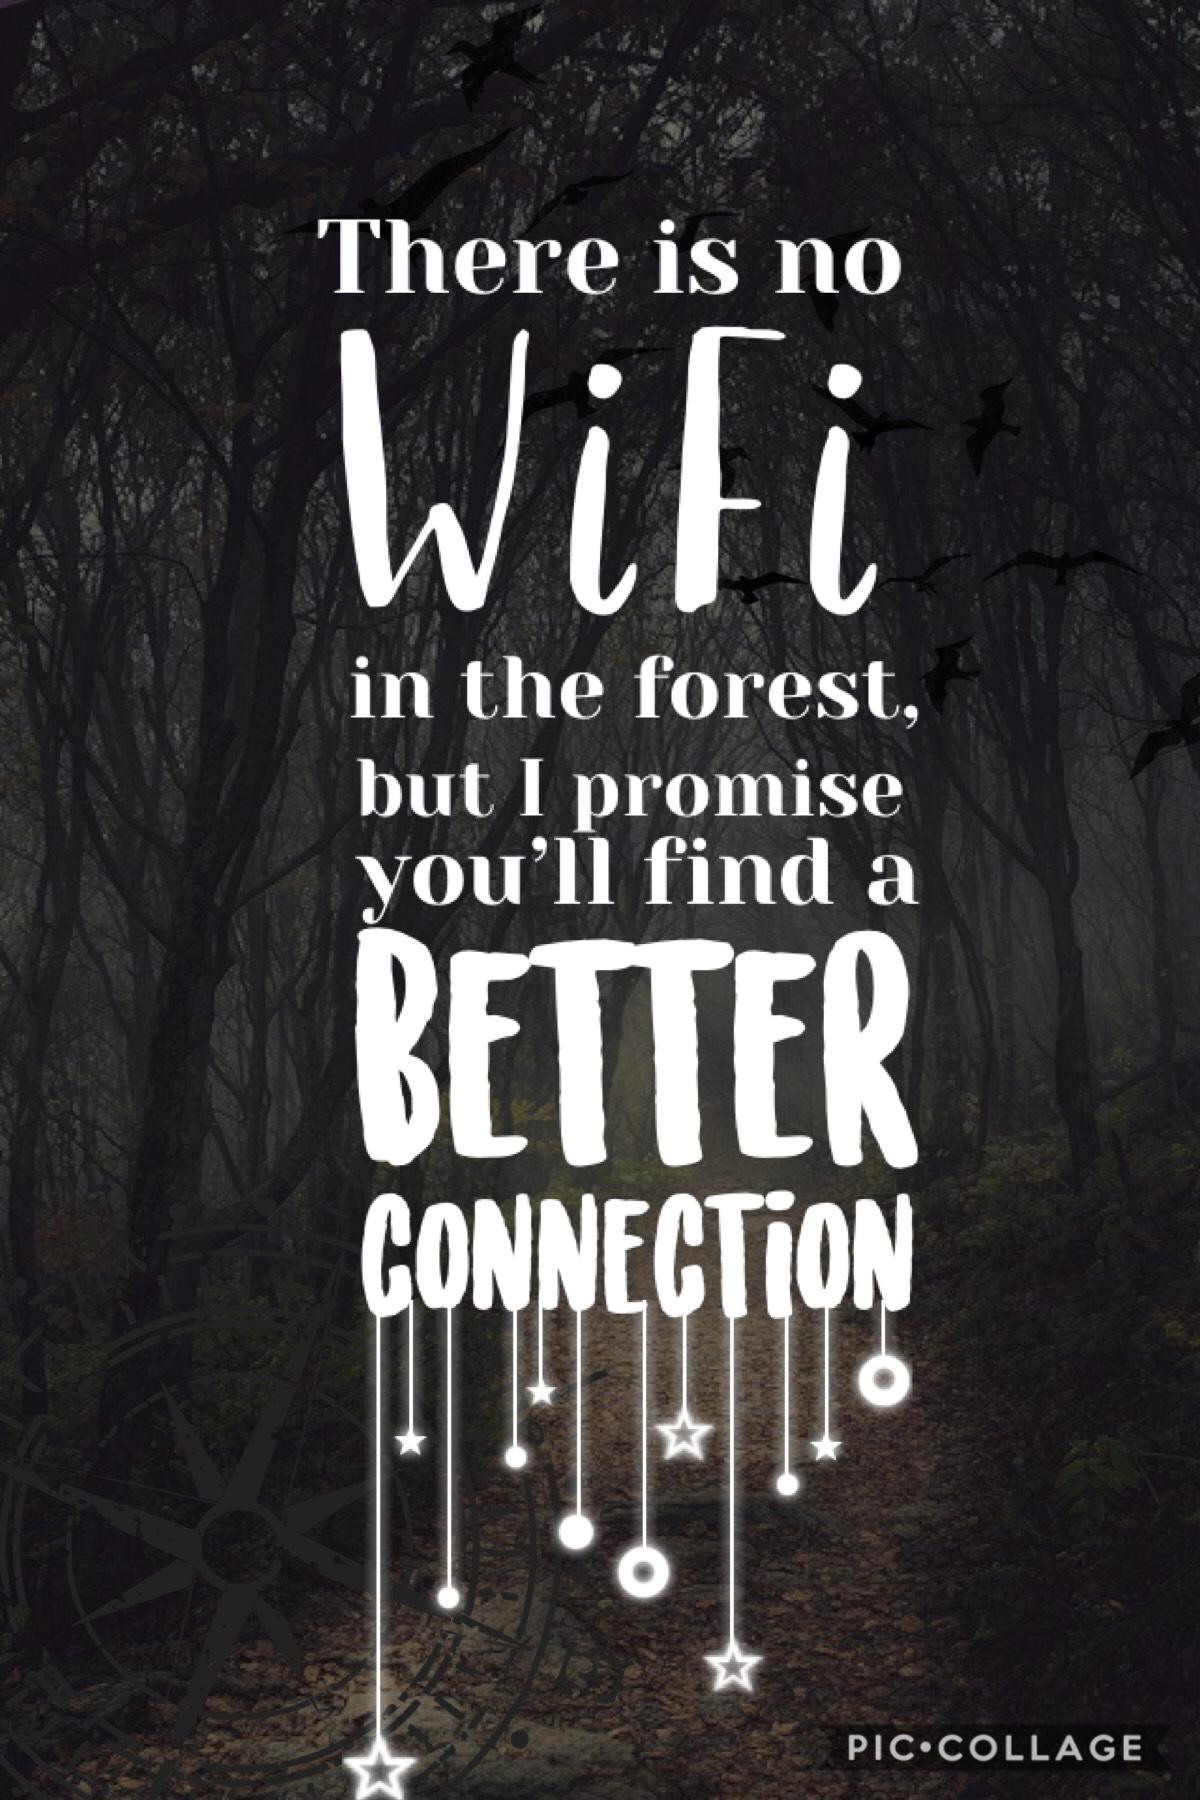 Tap>🌳

Even though there’s WiFi almost everywhere now, you can still find a better connection (*clears throat* PEOPLE!)

Sorry I haven’t posted for a while! 😐

2/4/19